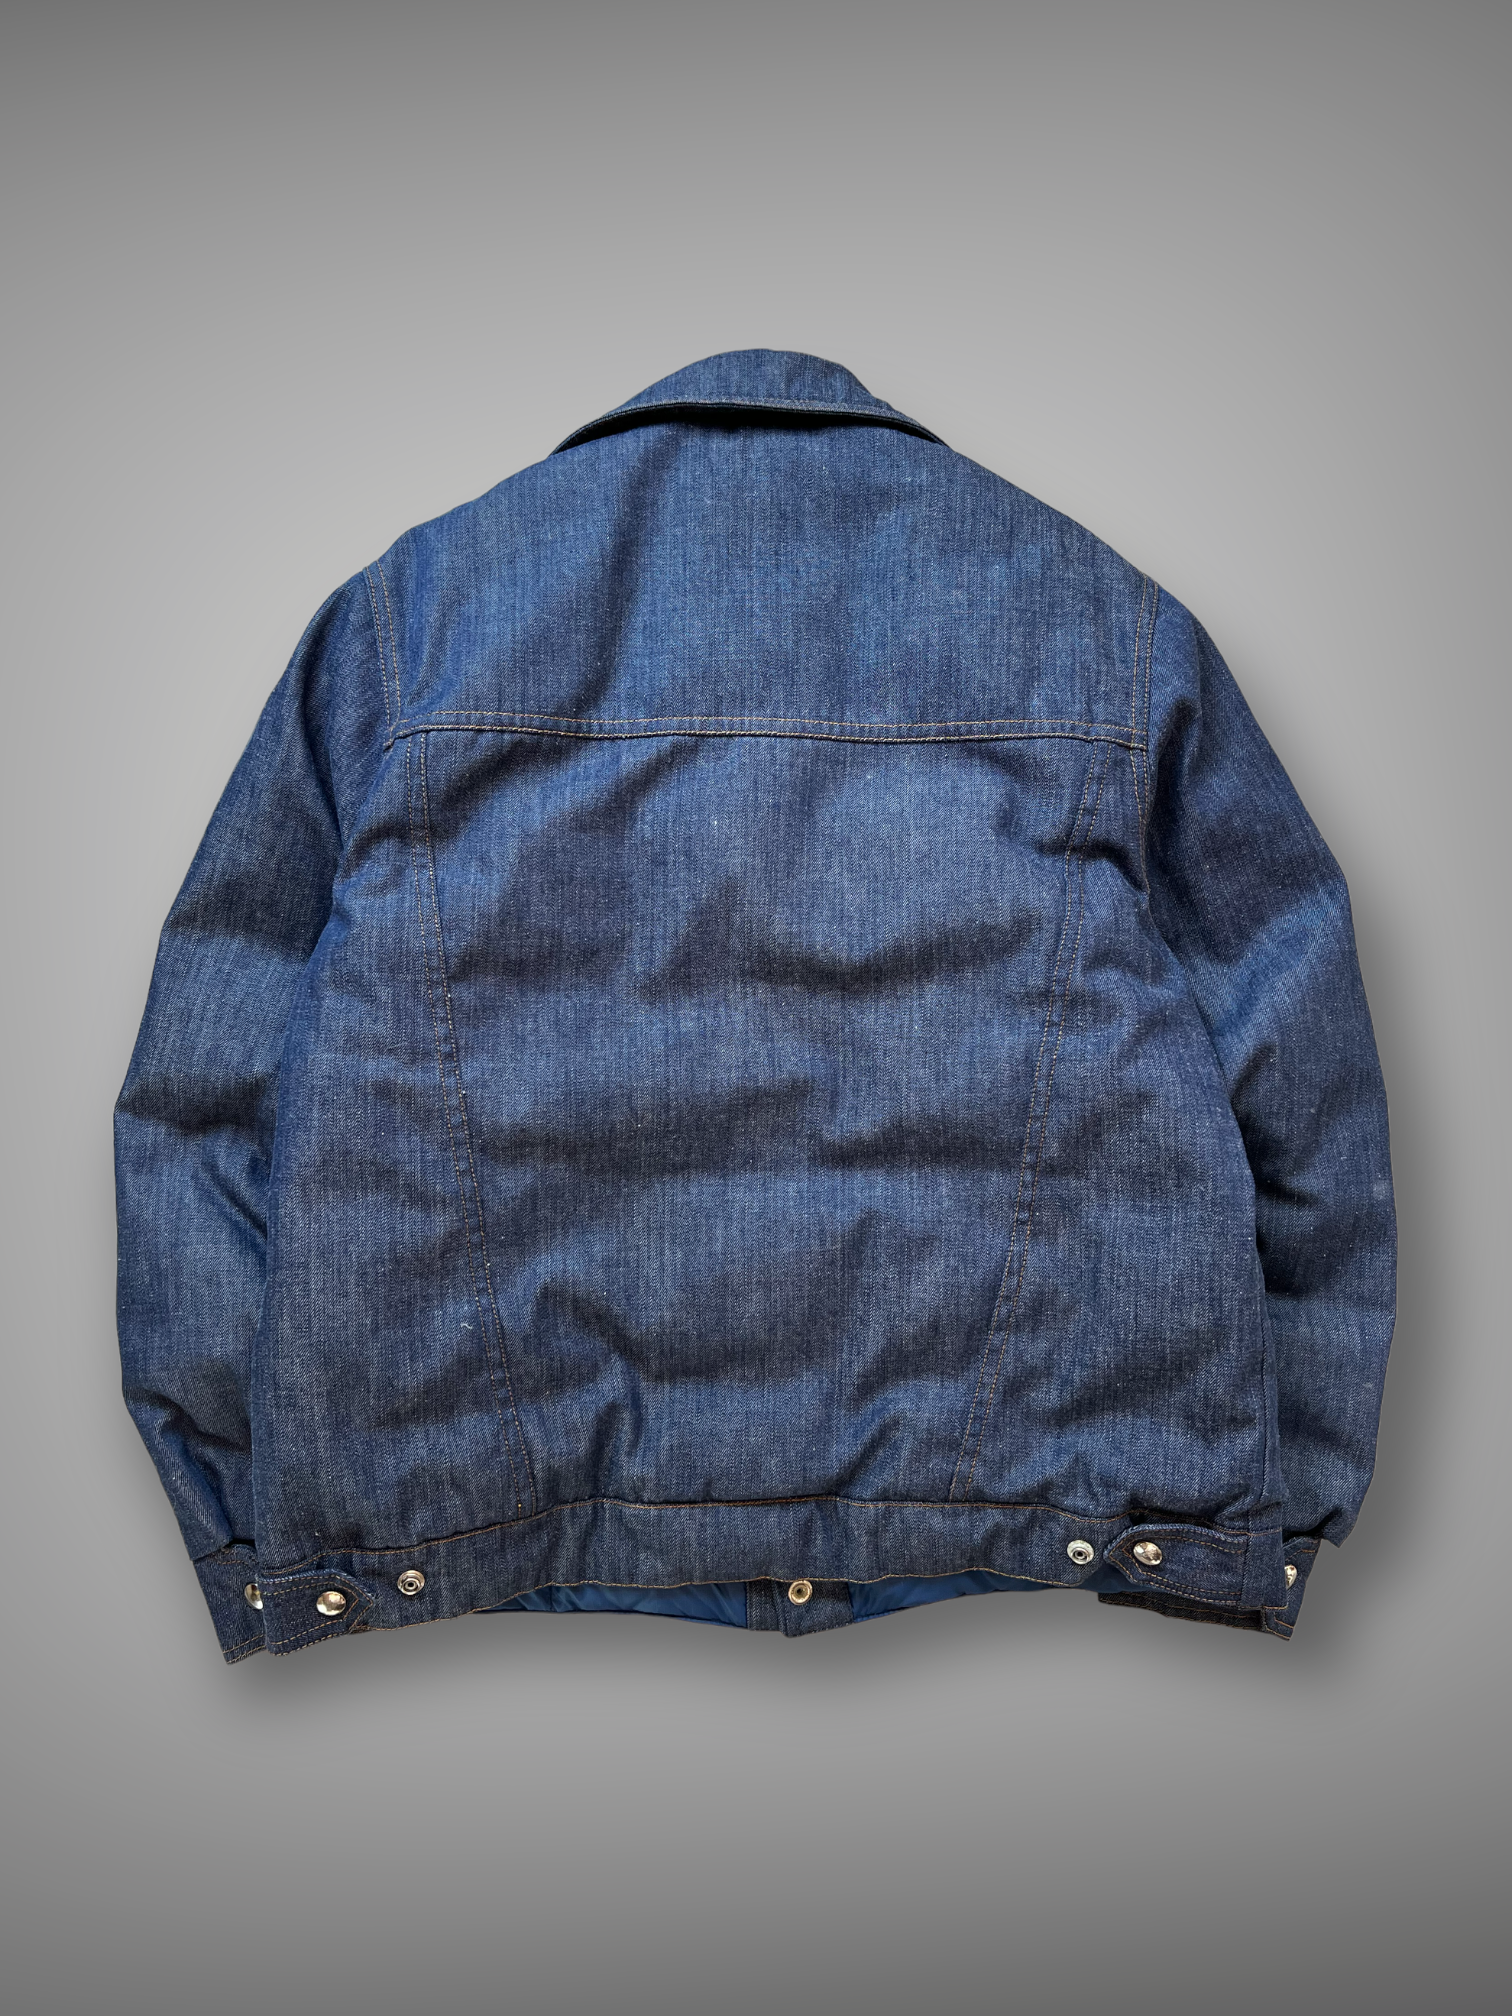 70’s/80’s Mountain Products denim down jacket L/XL